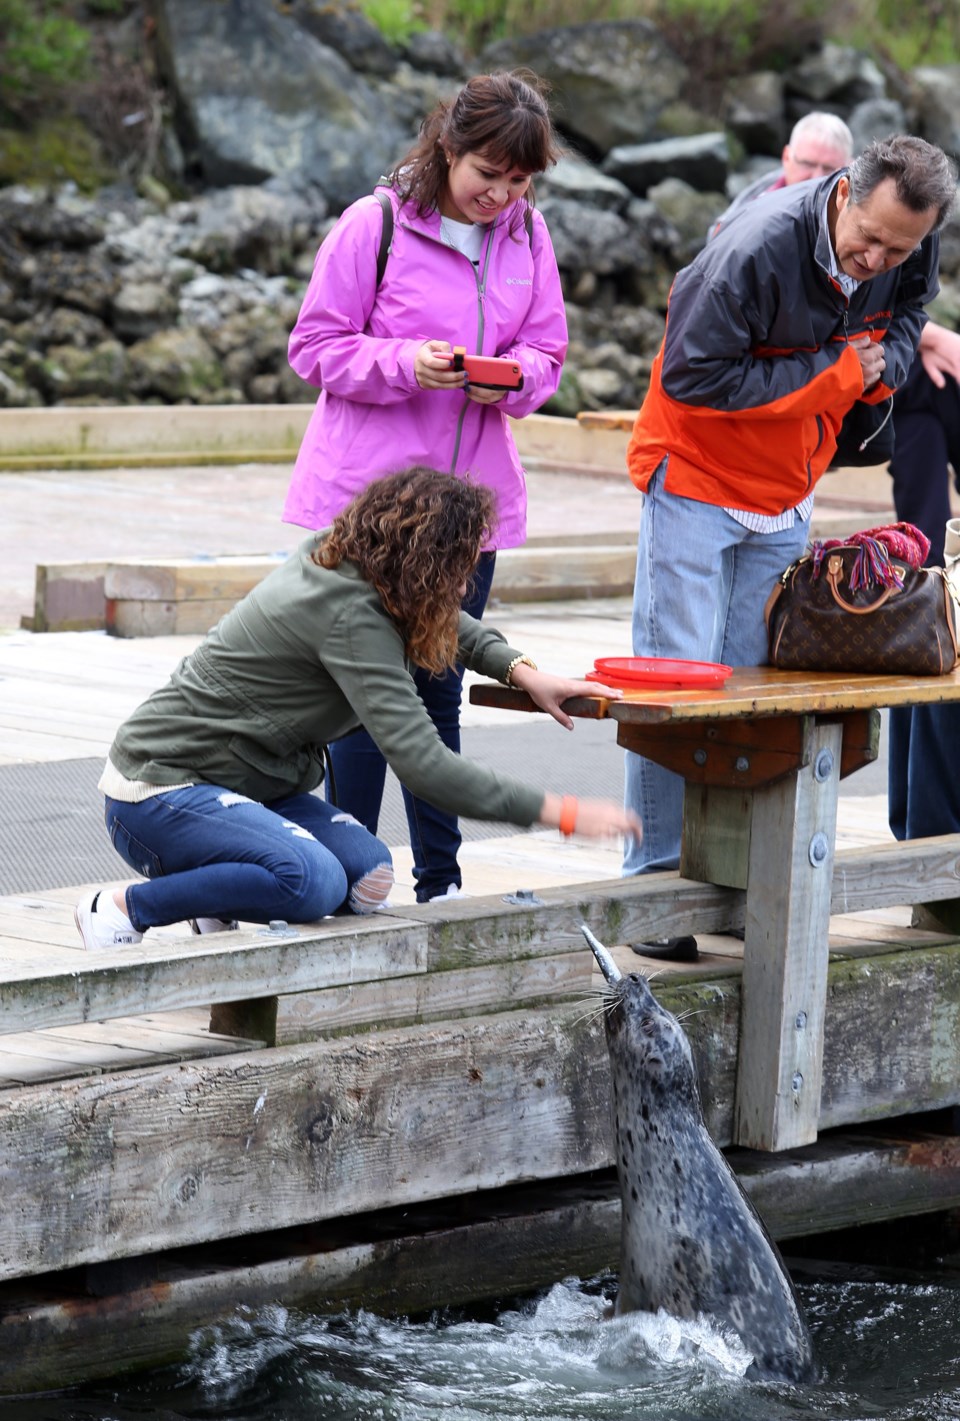 Tourists feed a harbour seal at Fisherman's Wharf